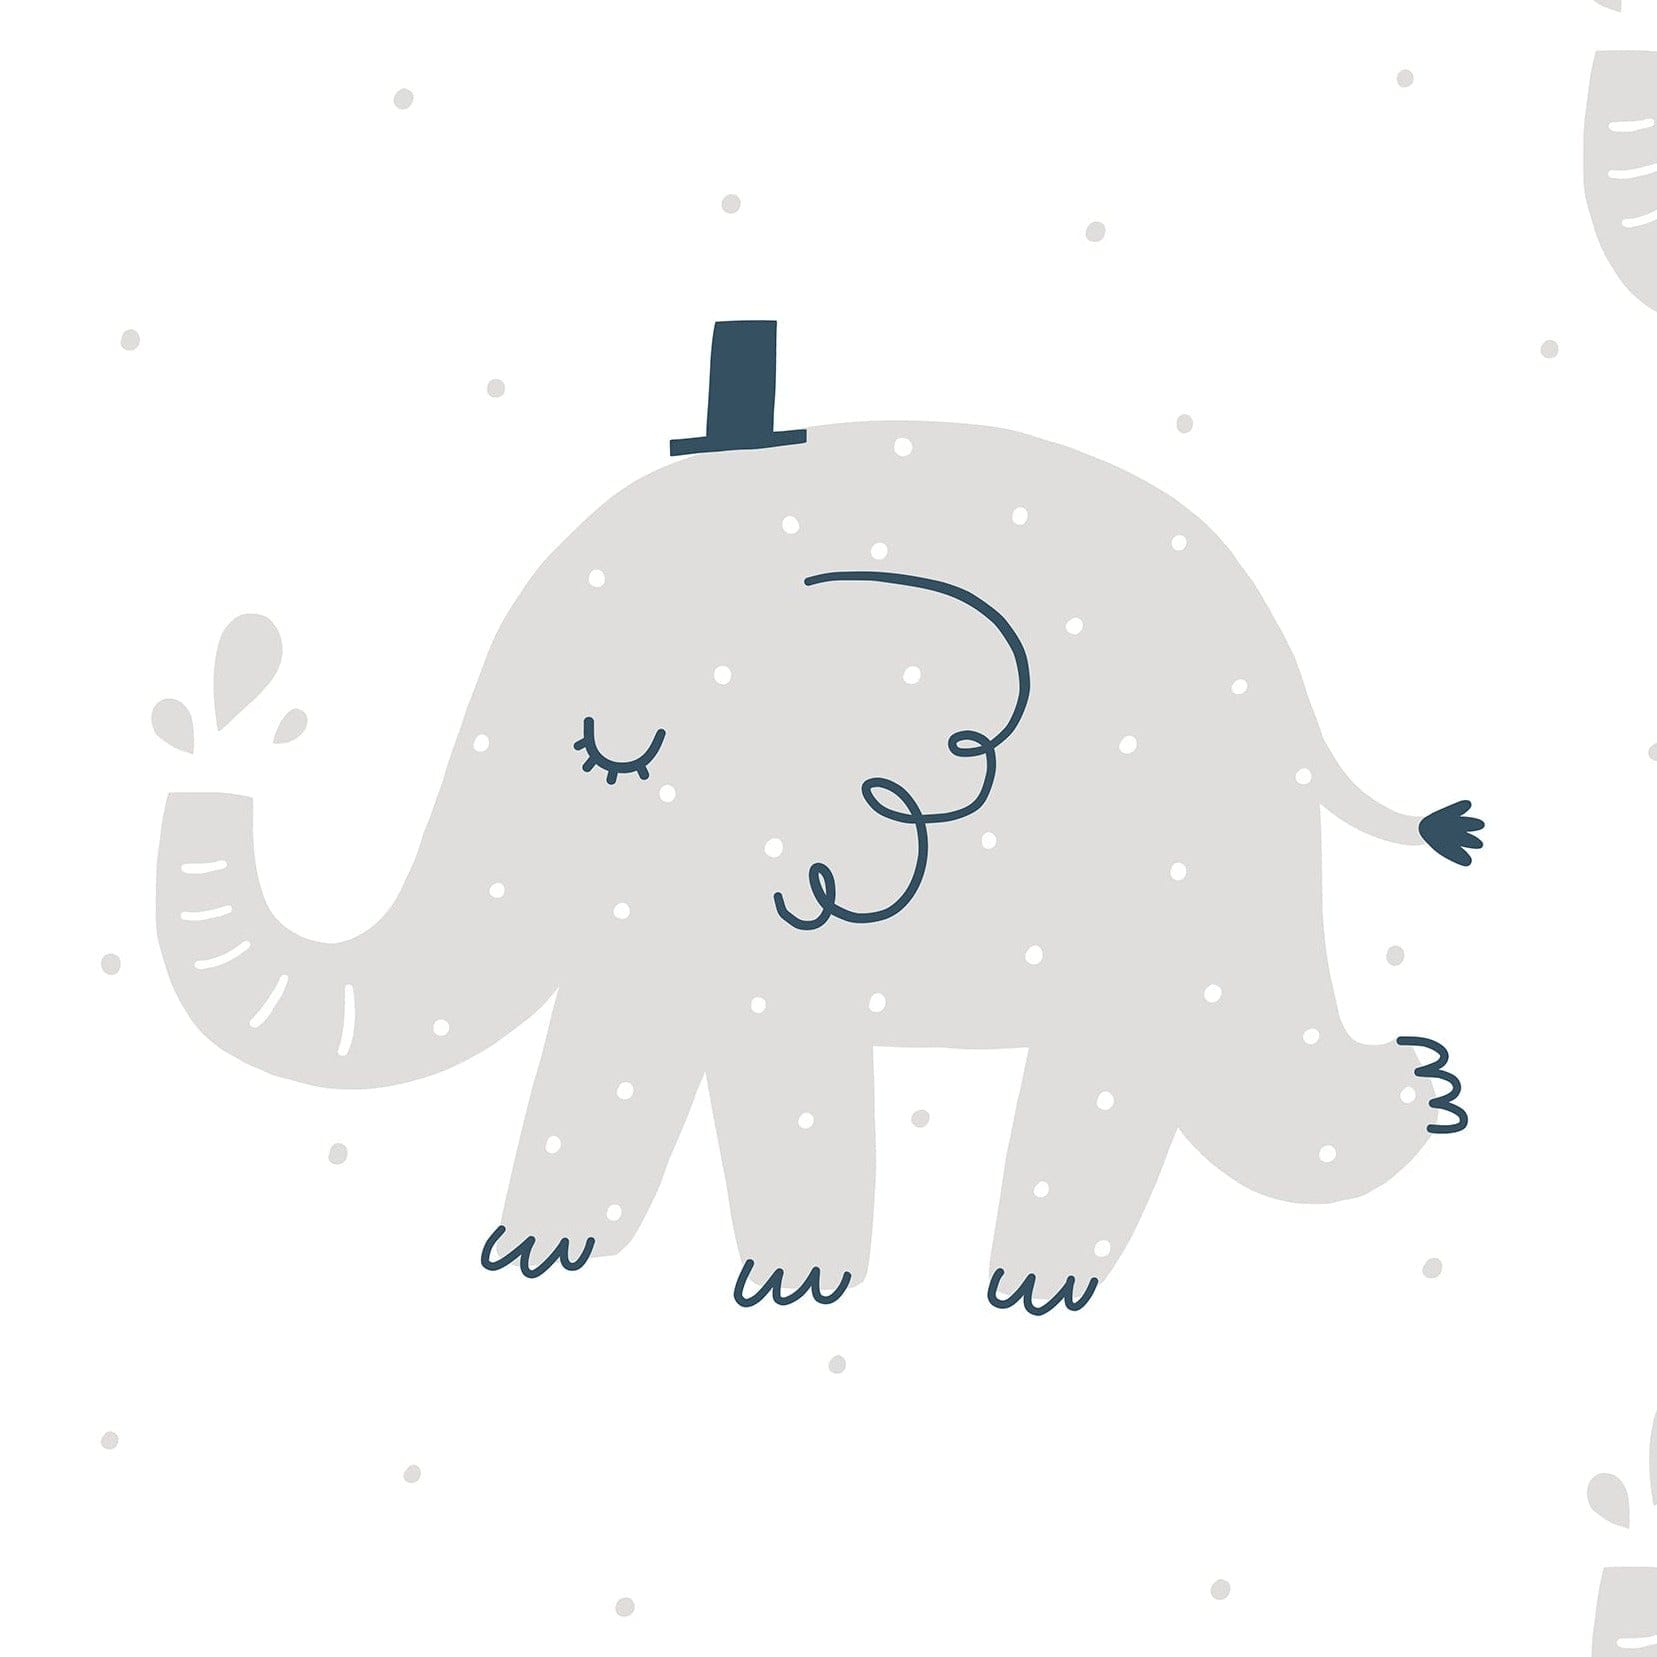 Close-up view of the Elephant Party Wallpaper featuring playful gray elephants with subtle blue accents, sprinkled with tiny dots over a white background, ideal for children's rooms or nurseries.